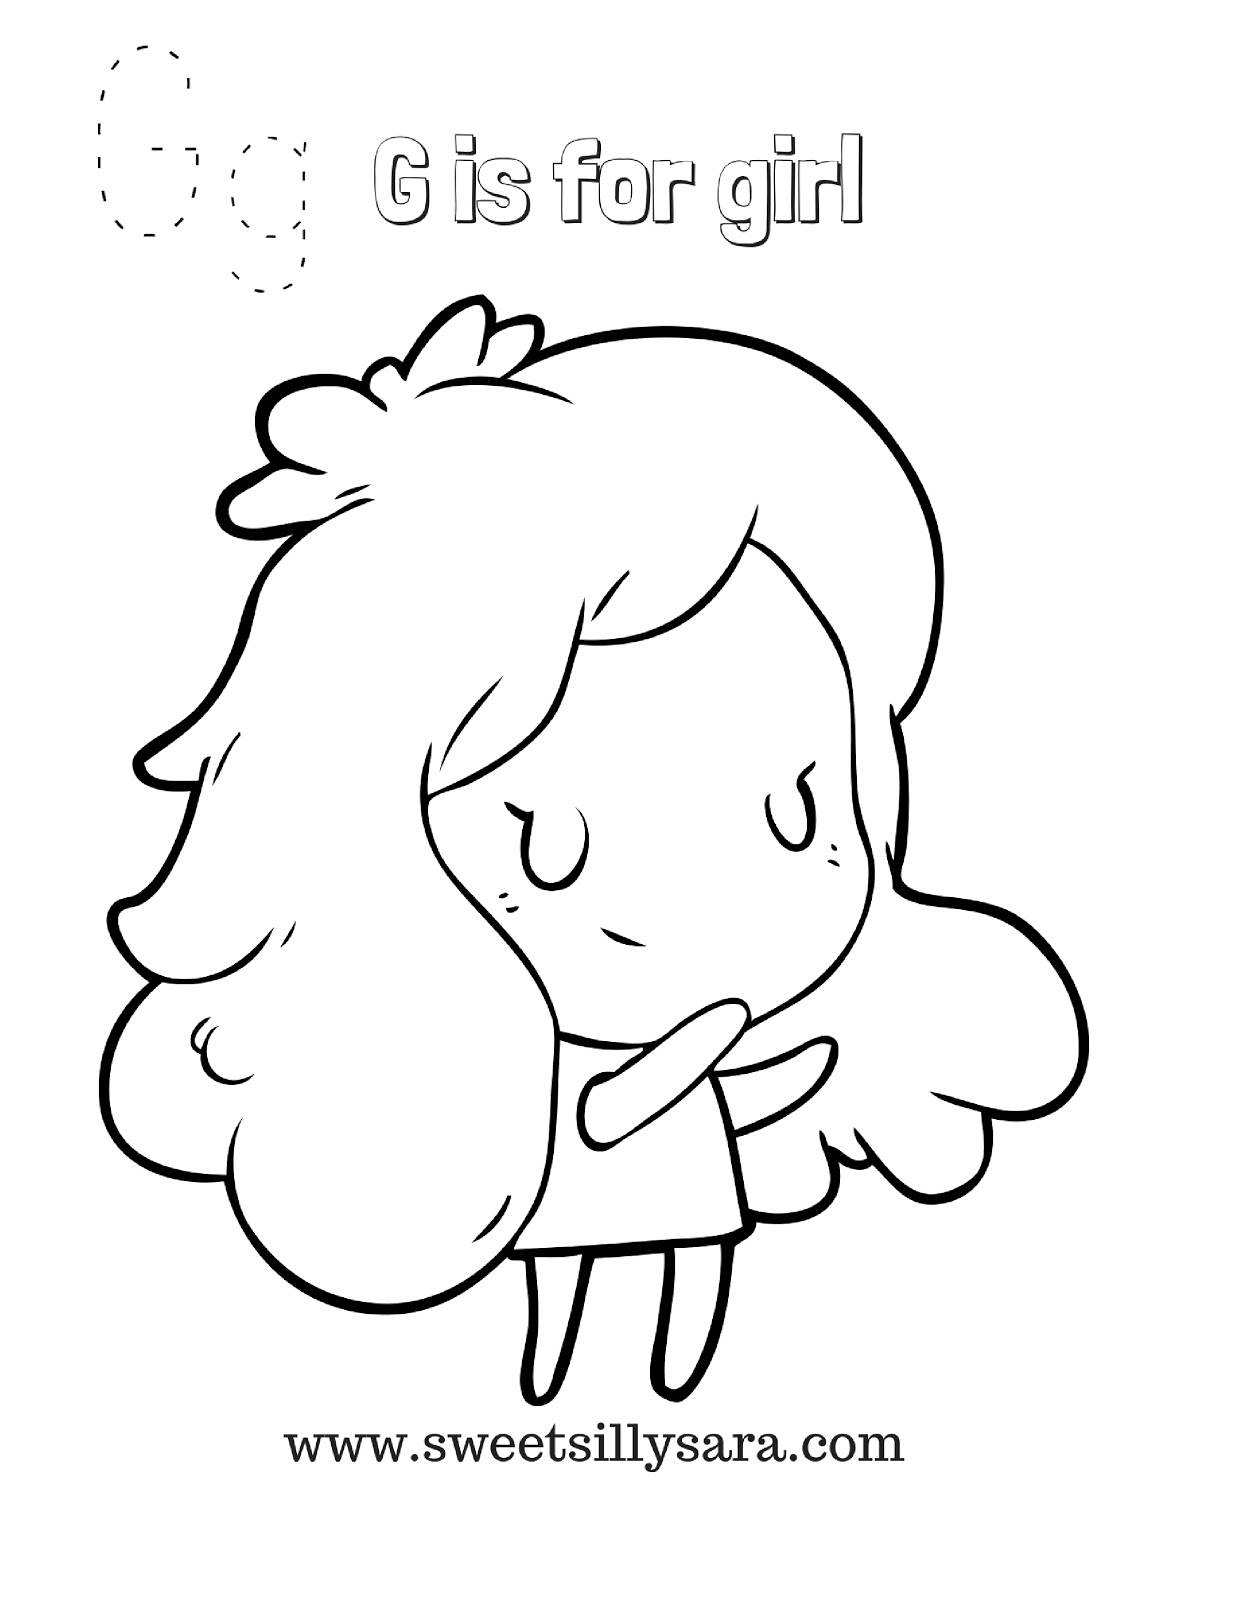 G is for Girls Coloring Page Free Printable, Cursive Font – The Art Kit